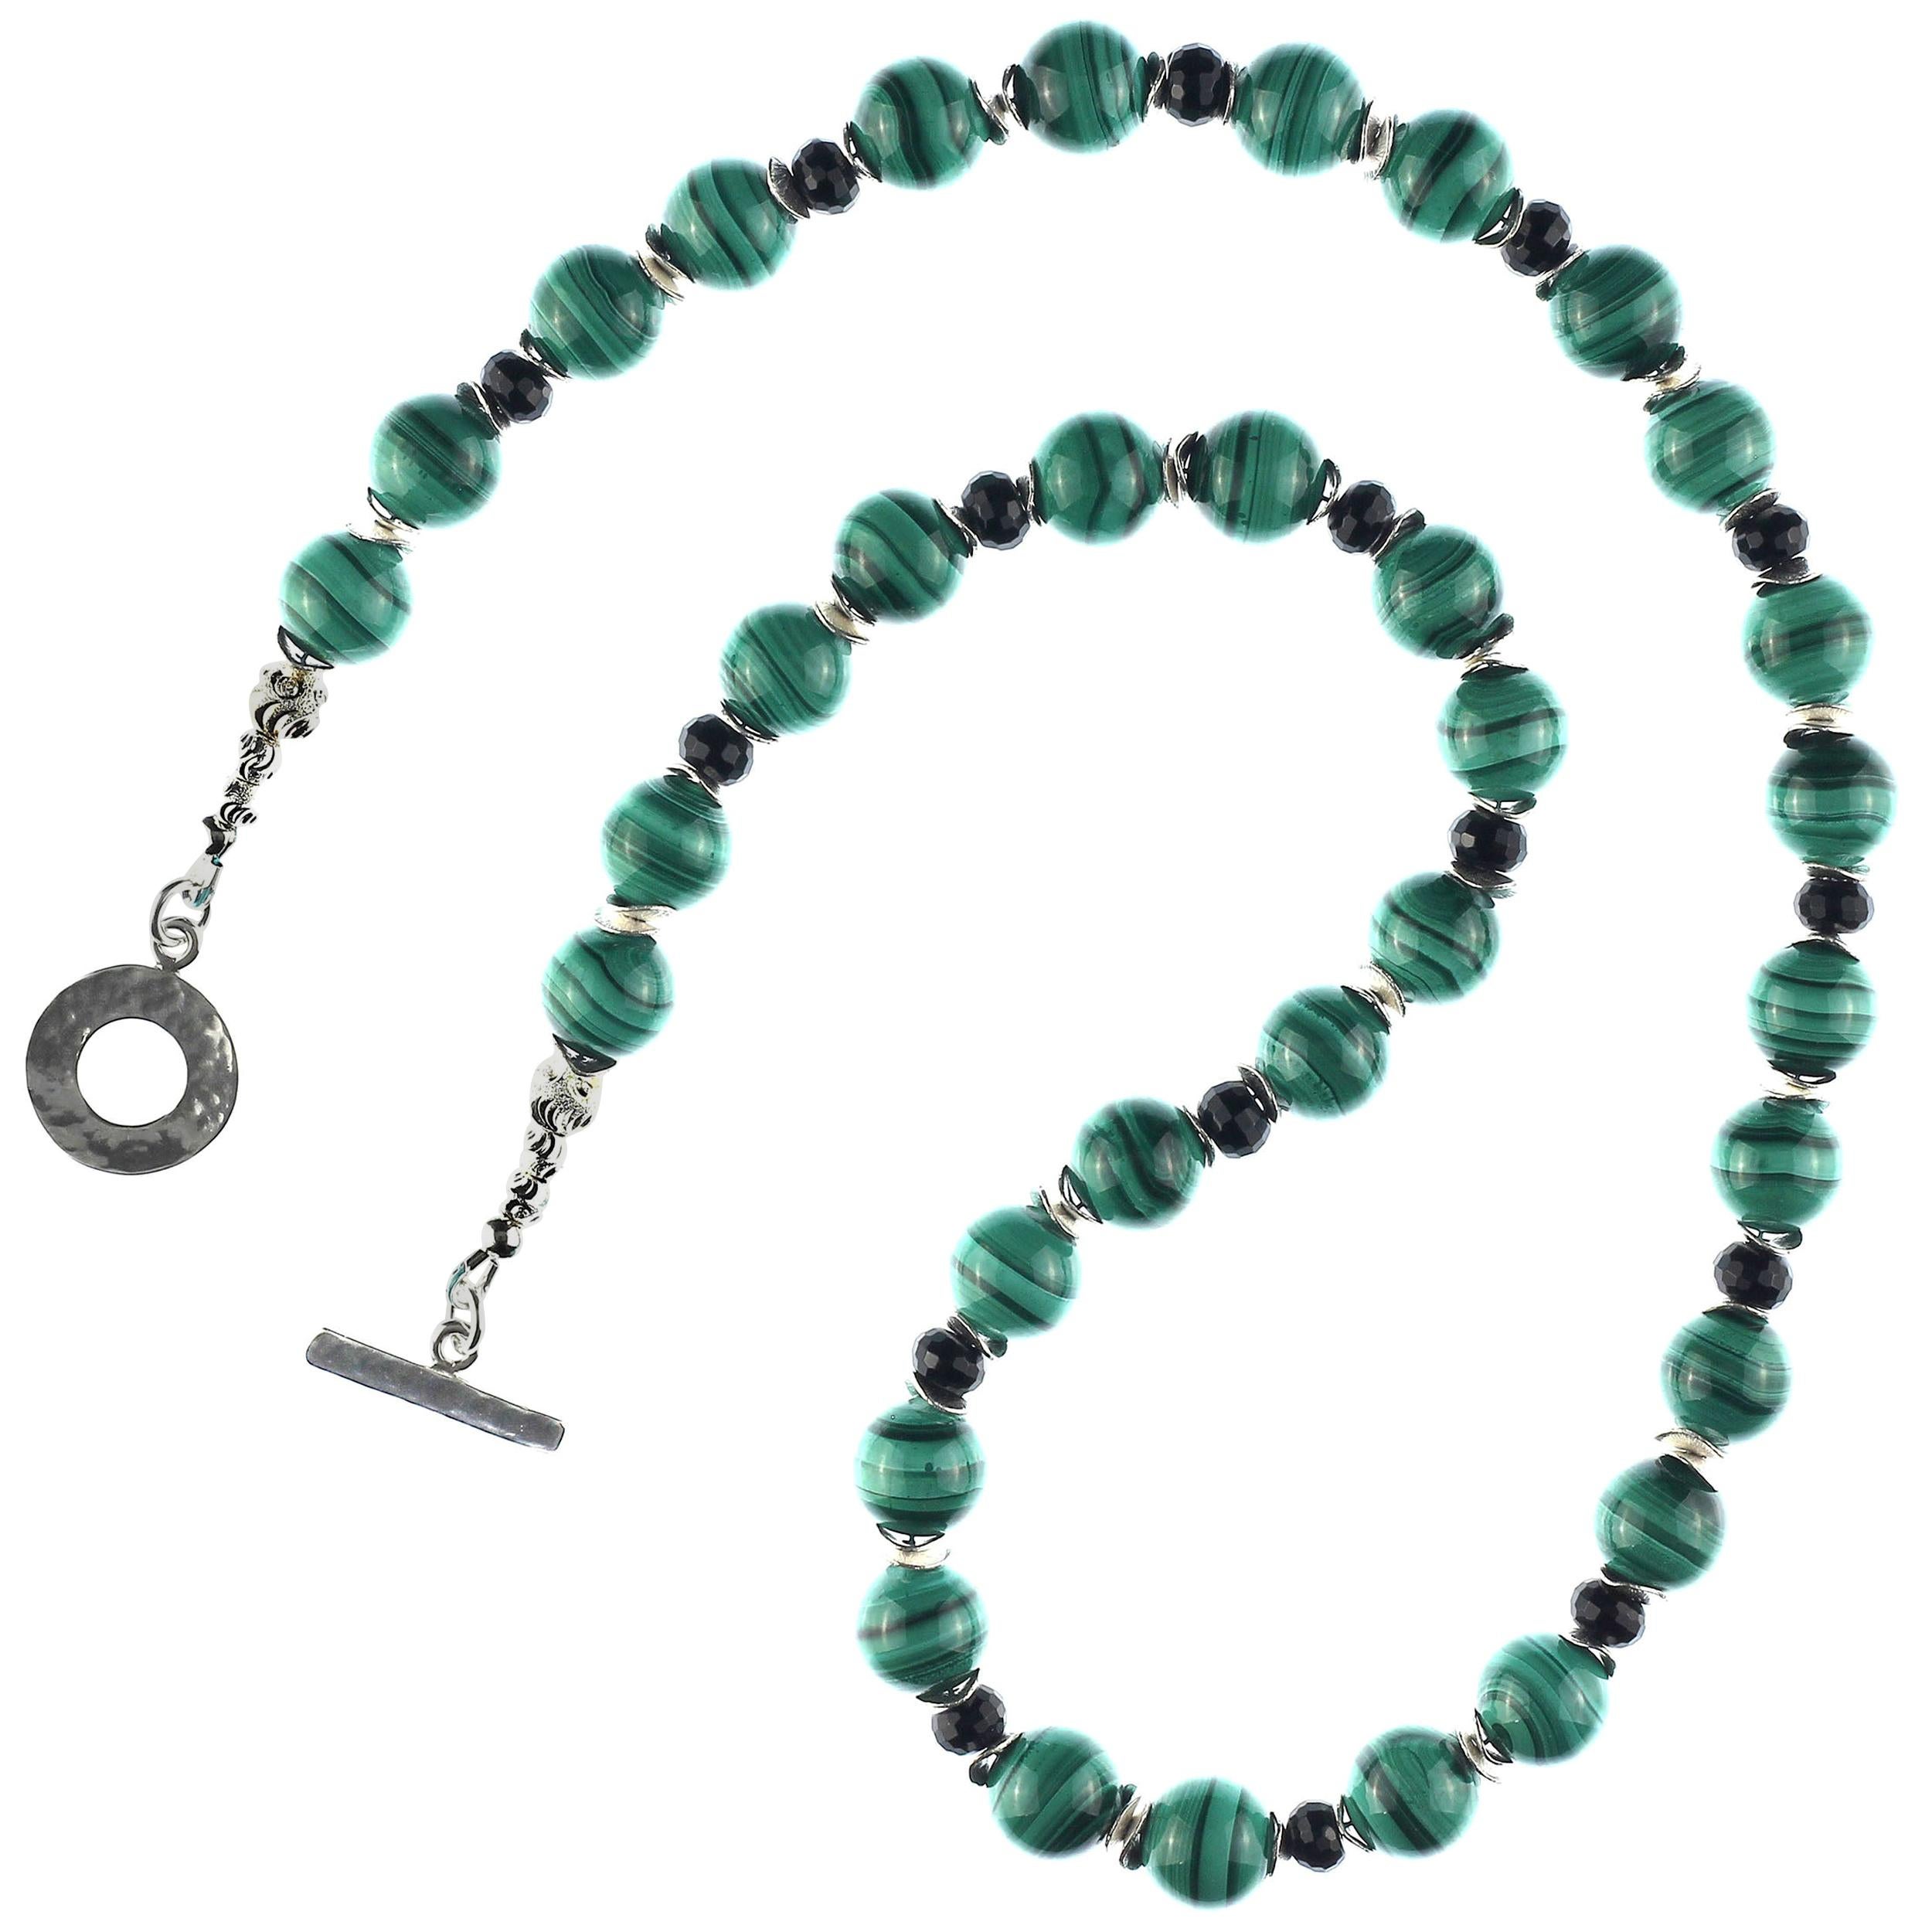 Malachite and Black Onyx necklace with Silver Accents